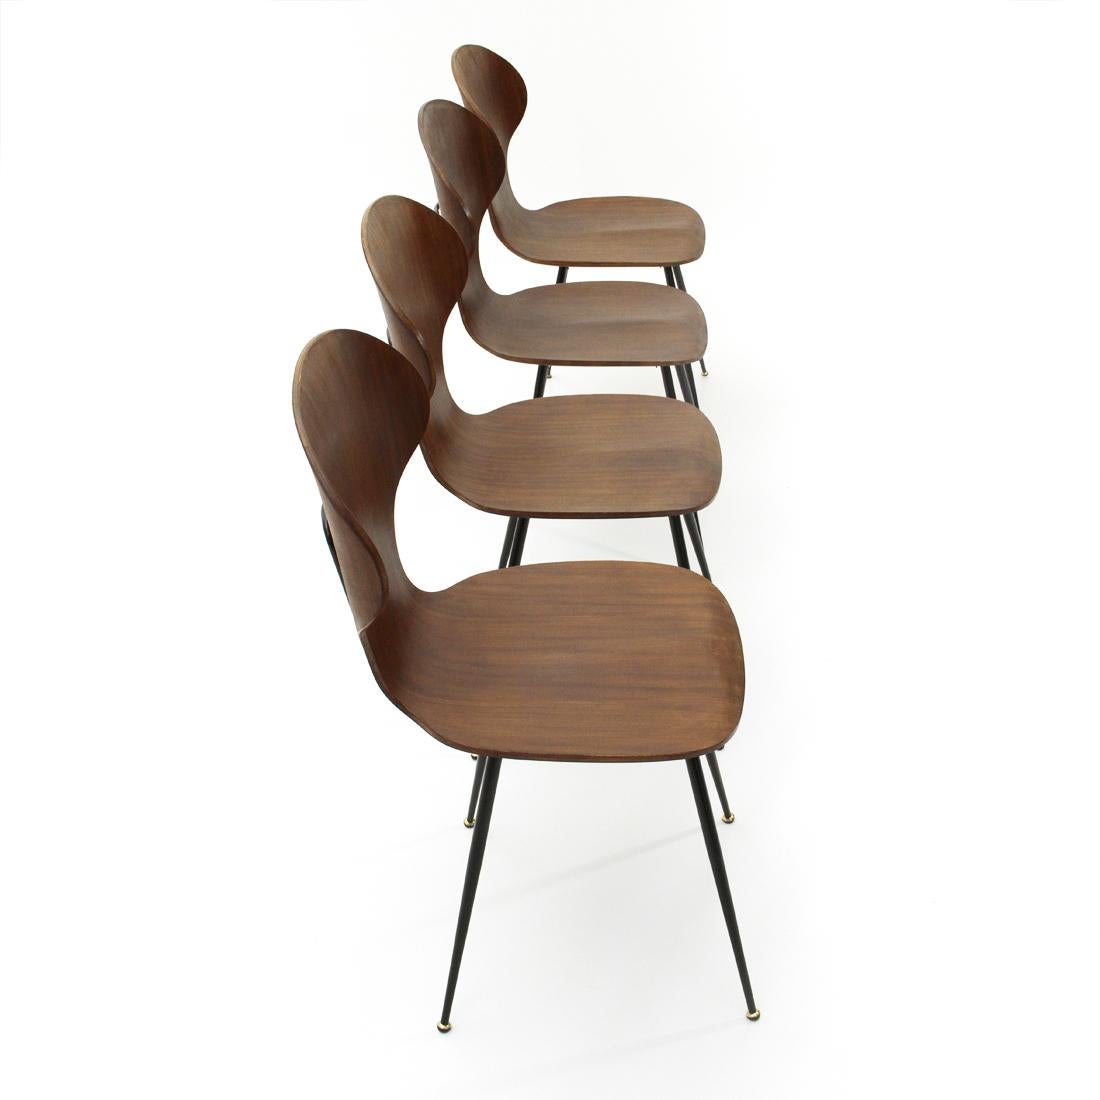 Four chairs produced by Industria Legni Curvati in the 1950s based on a project by Carlo Ratti.
Black painted metal structure. Hot curved plywood shell.
Good general conditions, some signs due to normal use over time.

Dimensions: Width 44 cm,